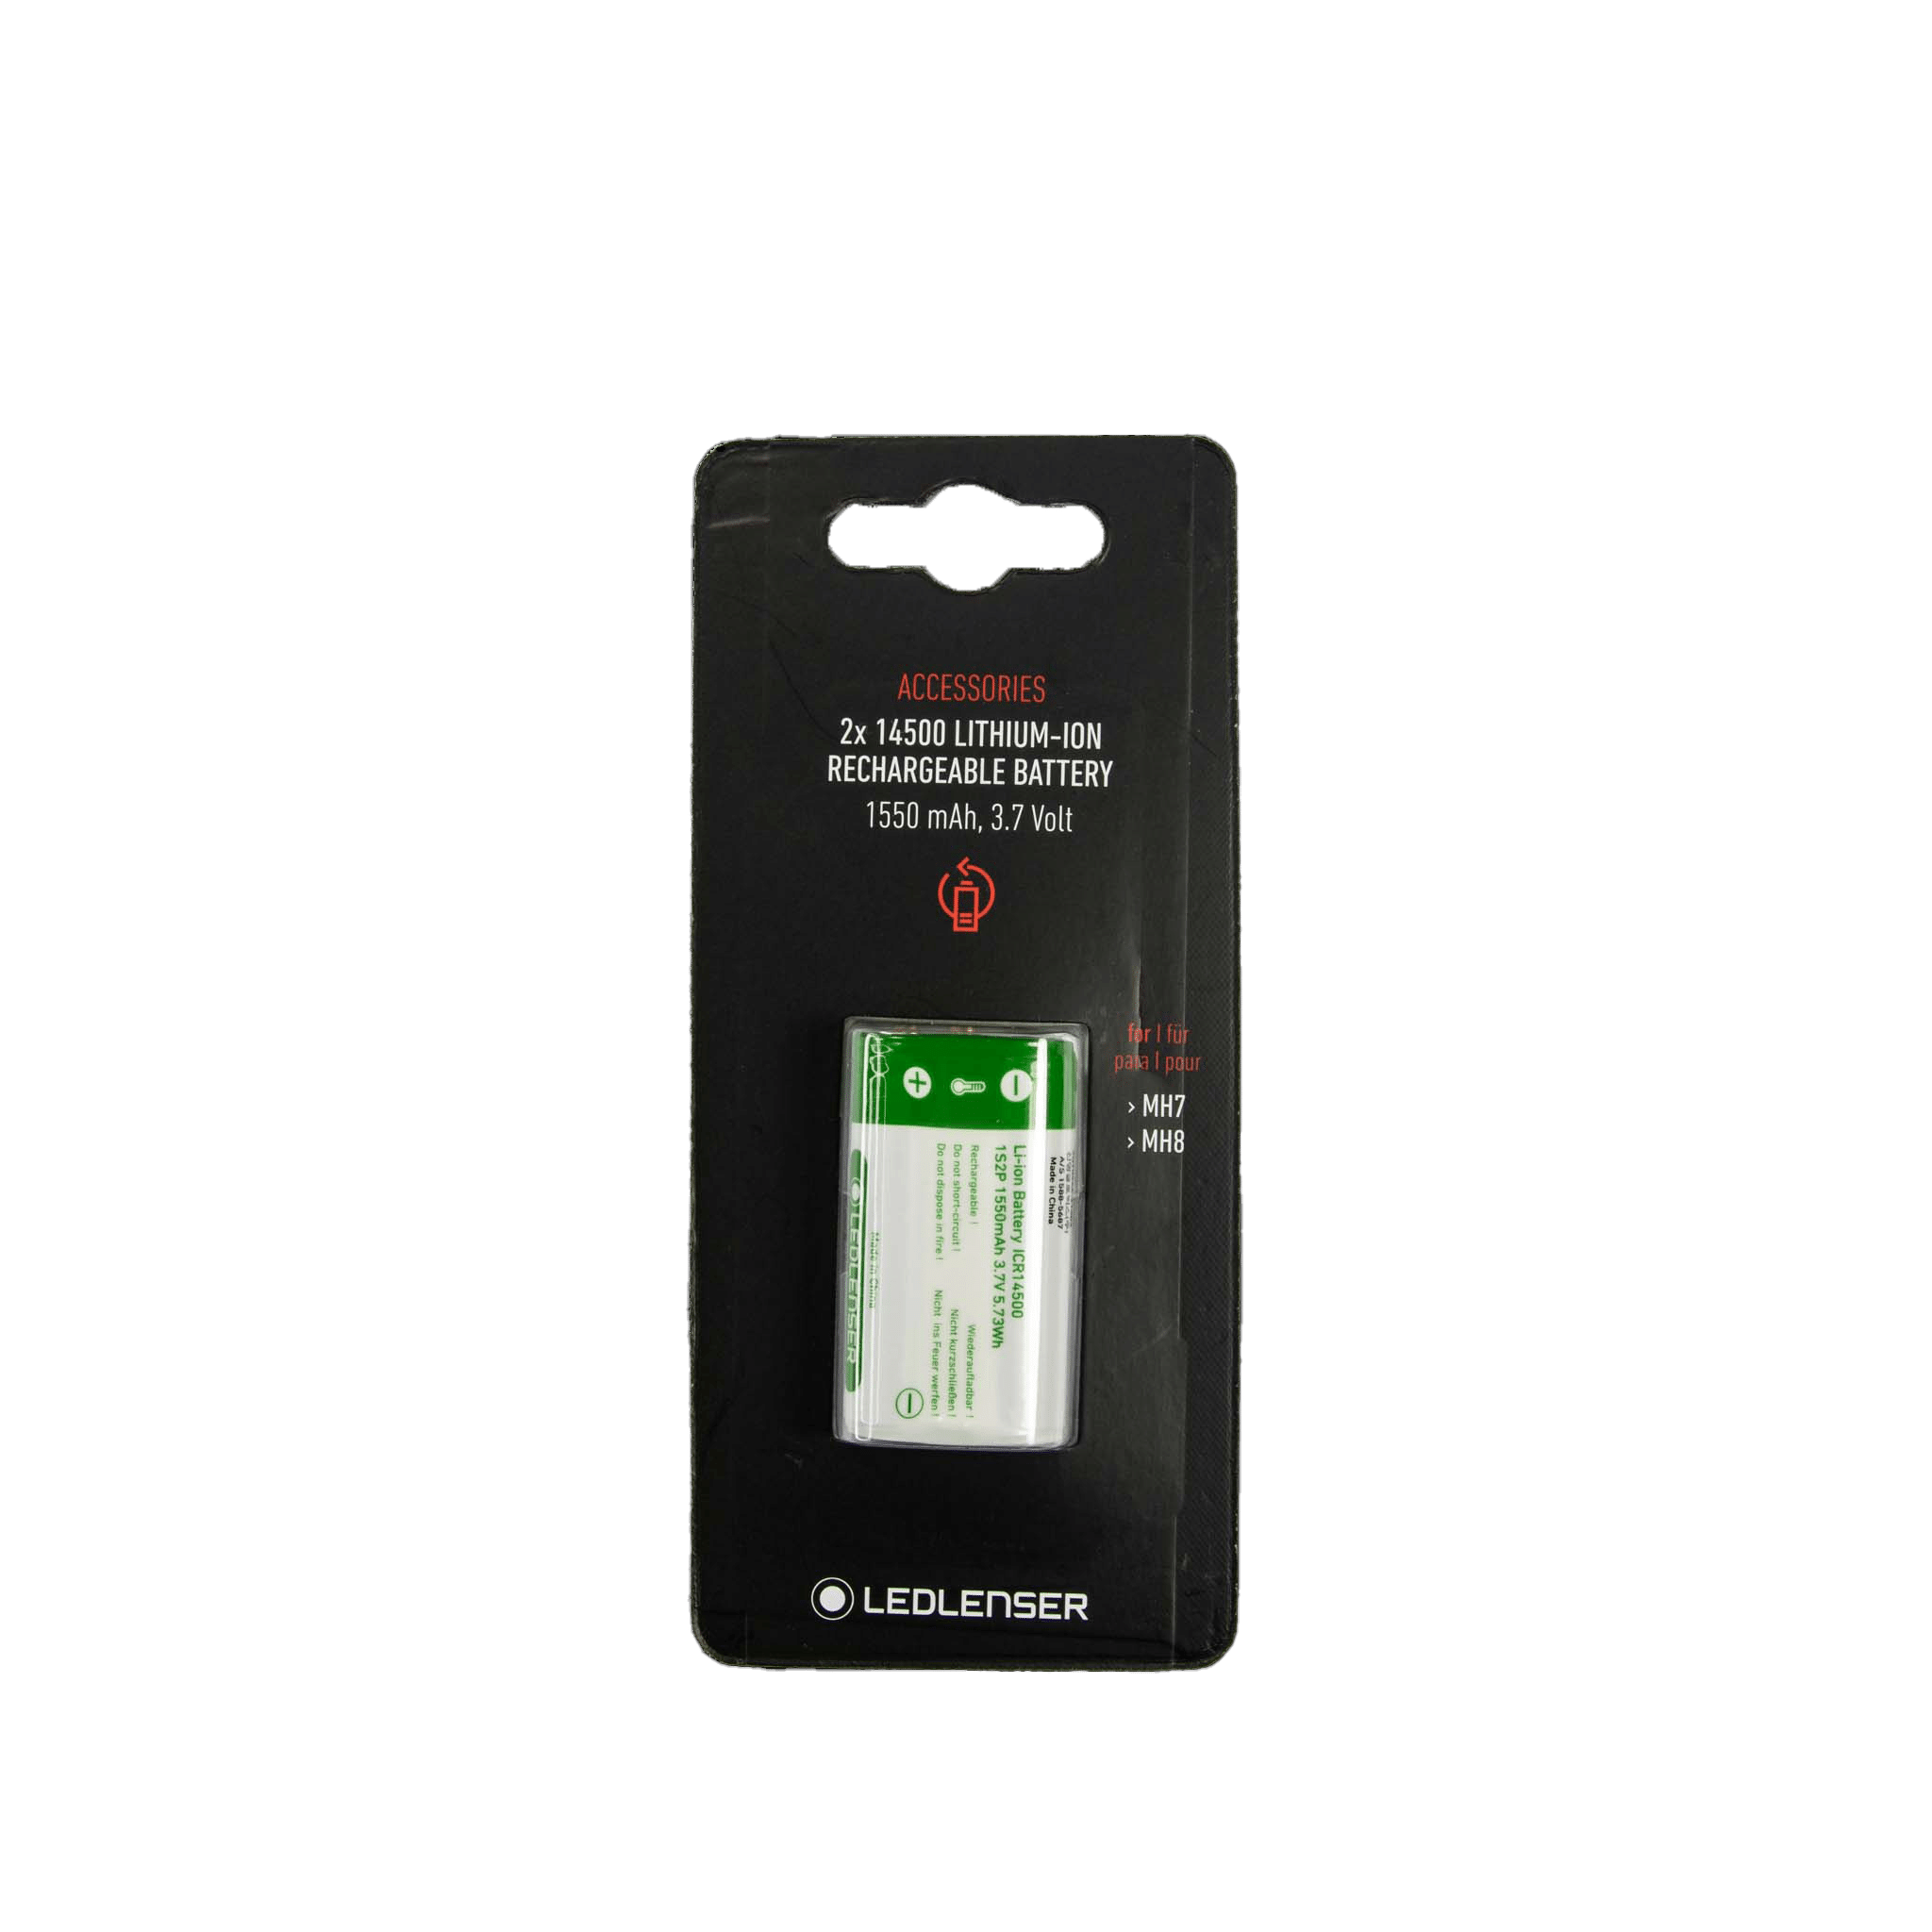 14500 x 2 Li-ion Rechargeable Battery Pack 1550mAh